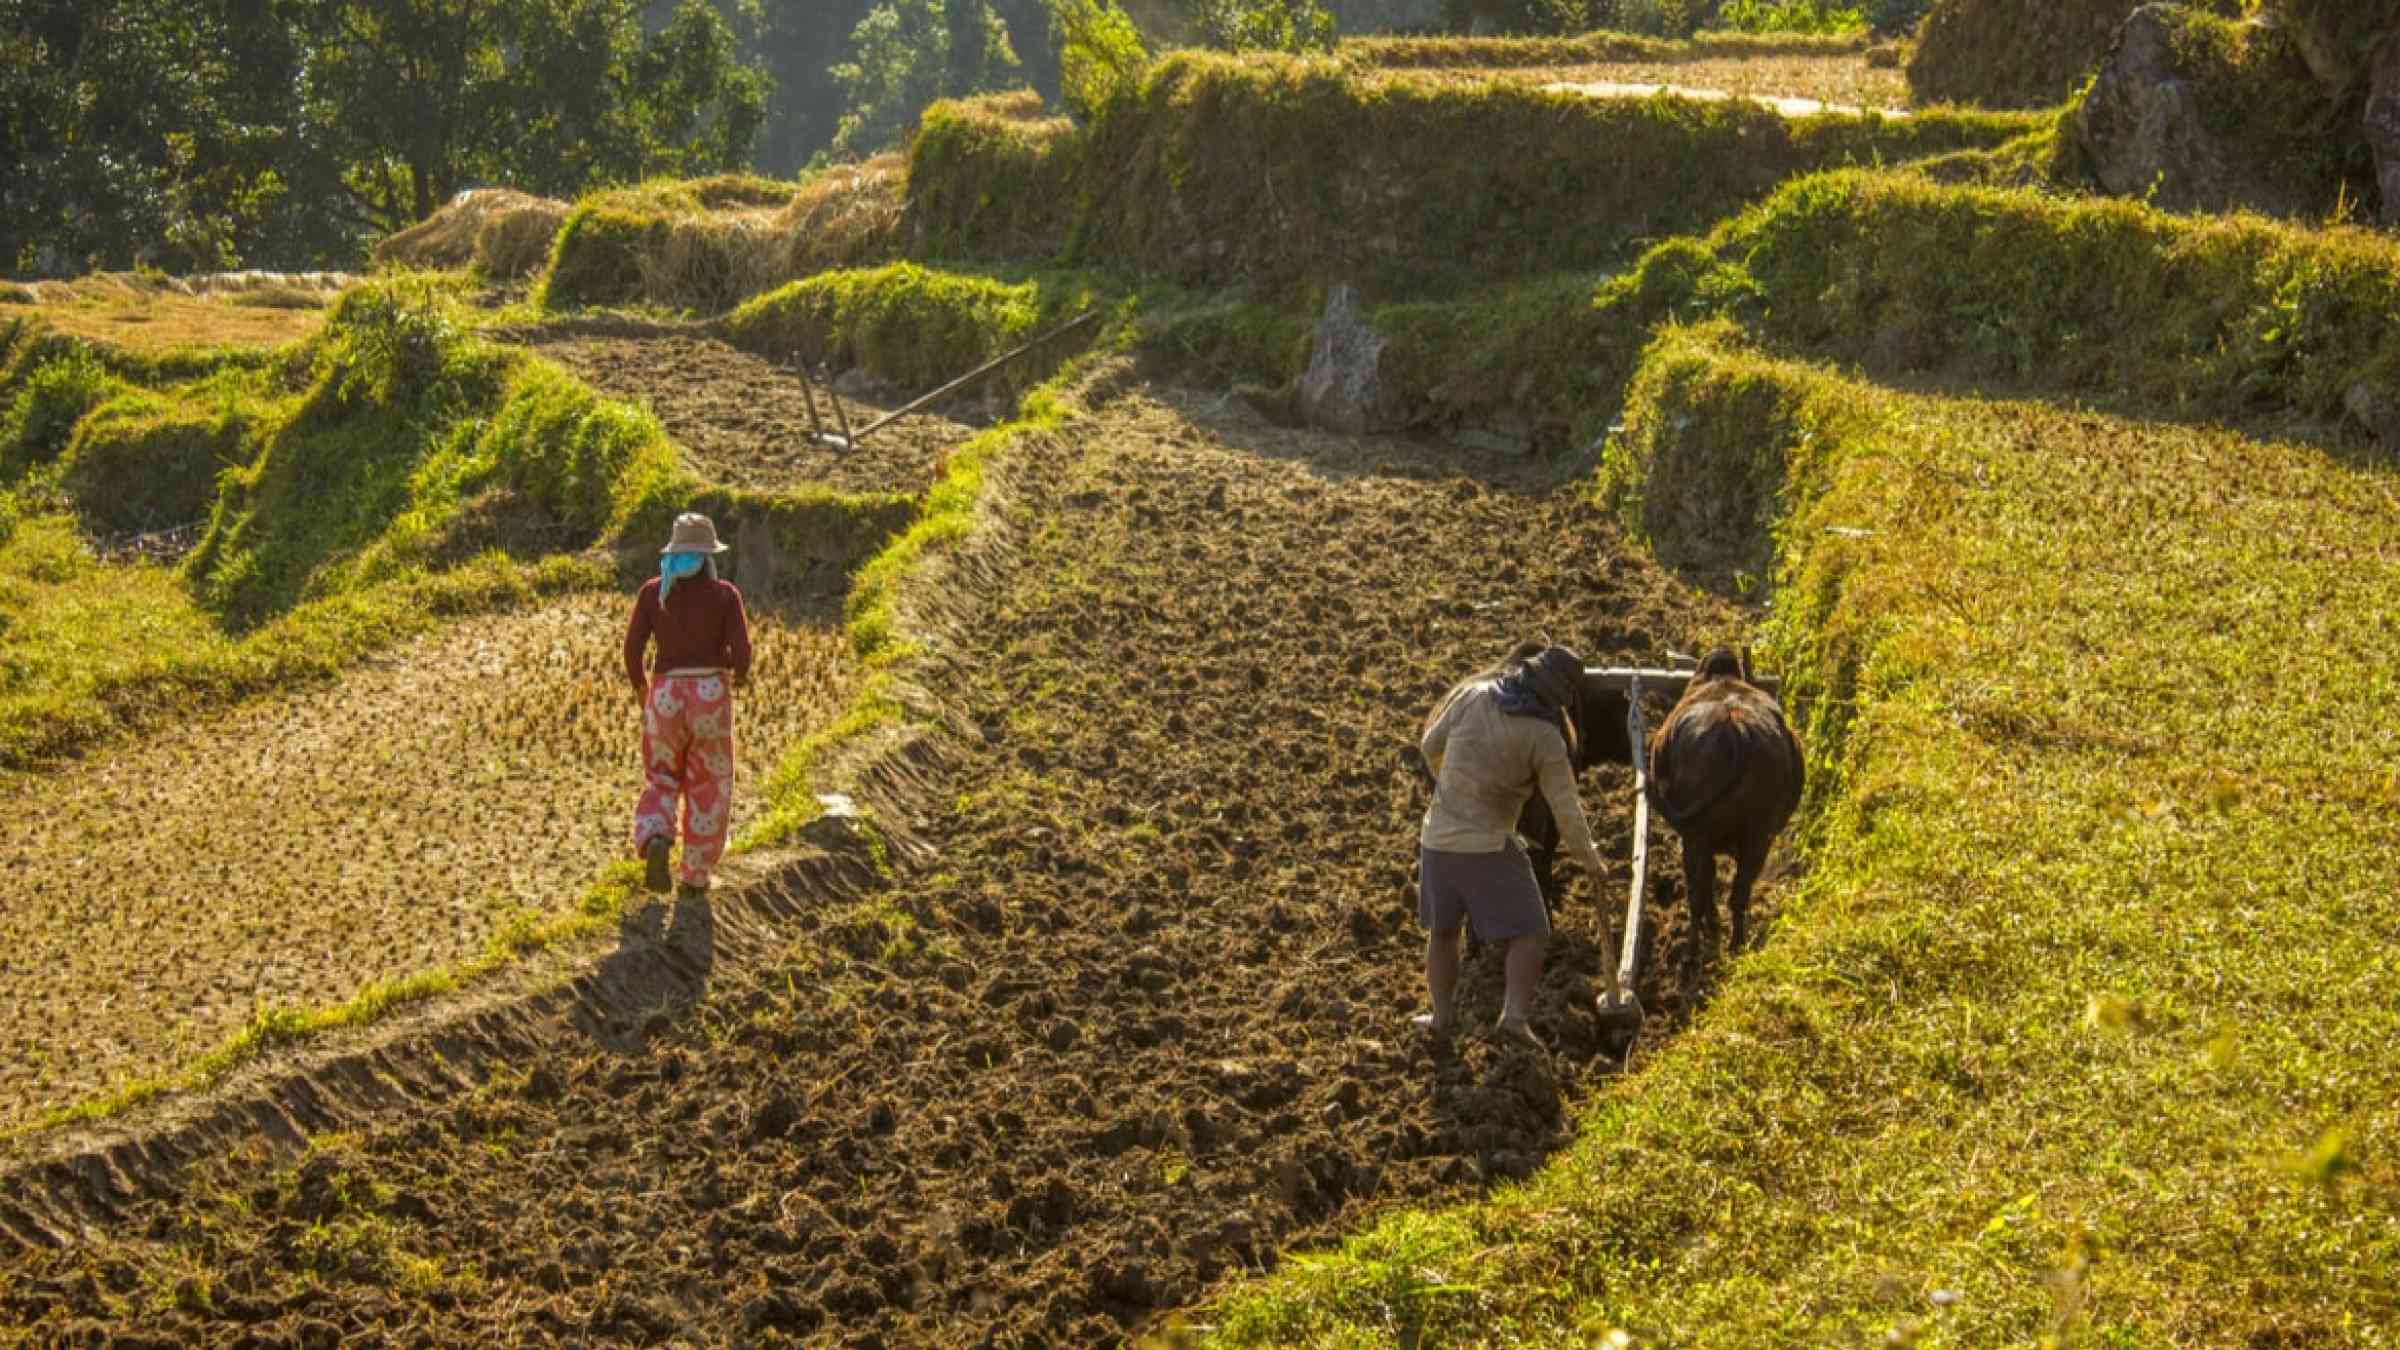 Farmer in Nepal plows rice field with buffaloes